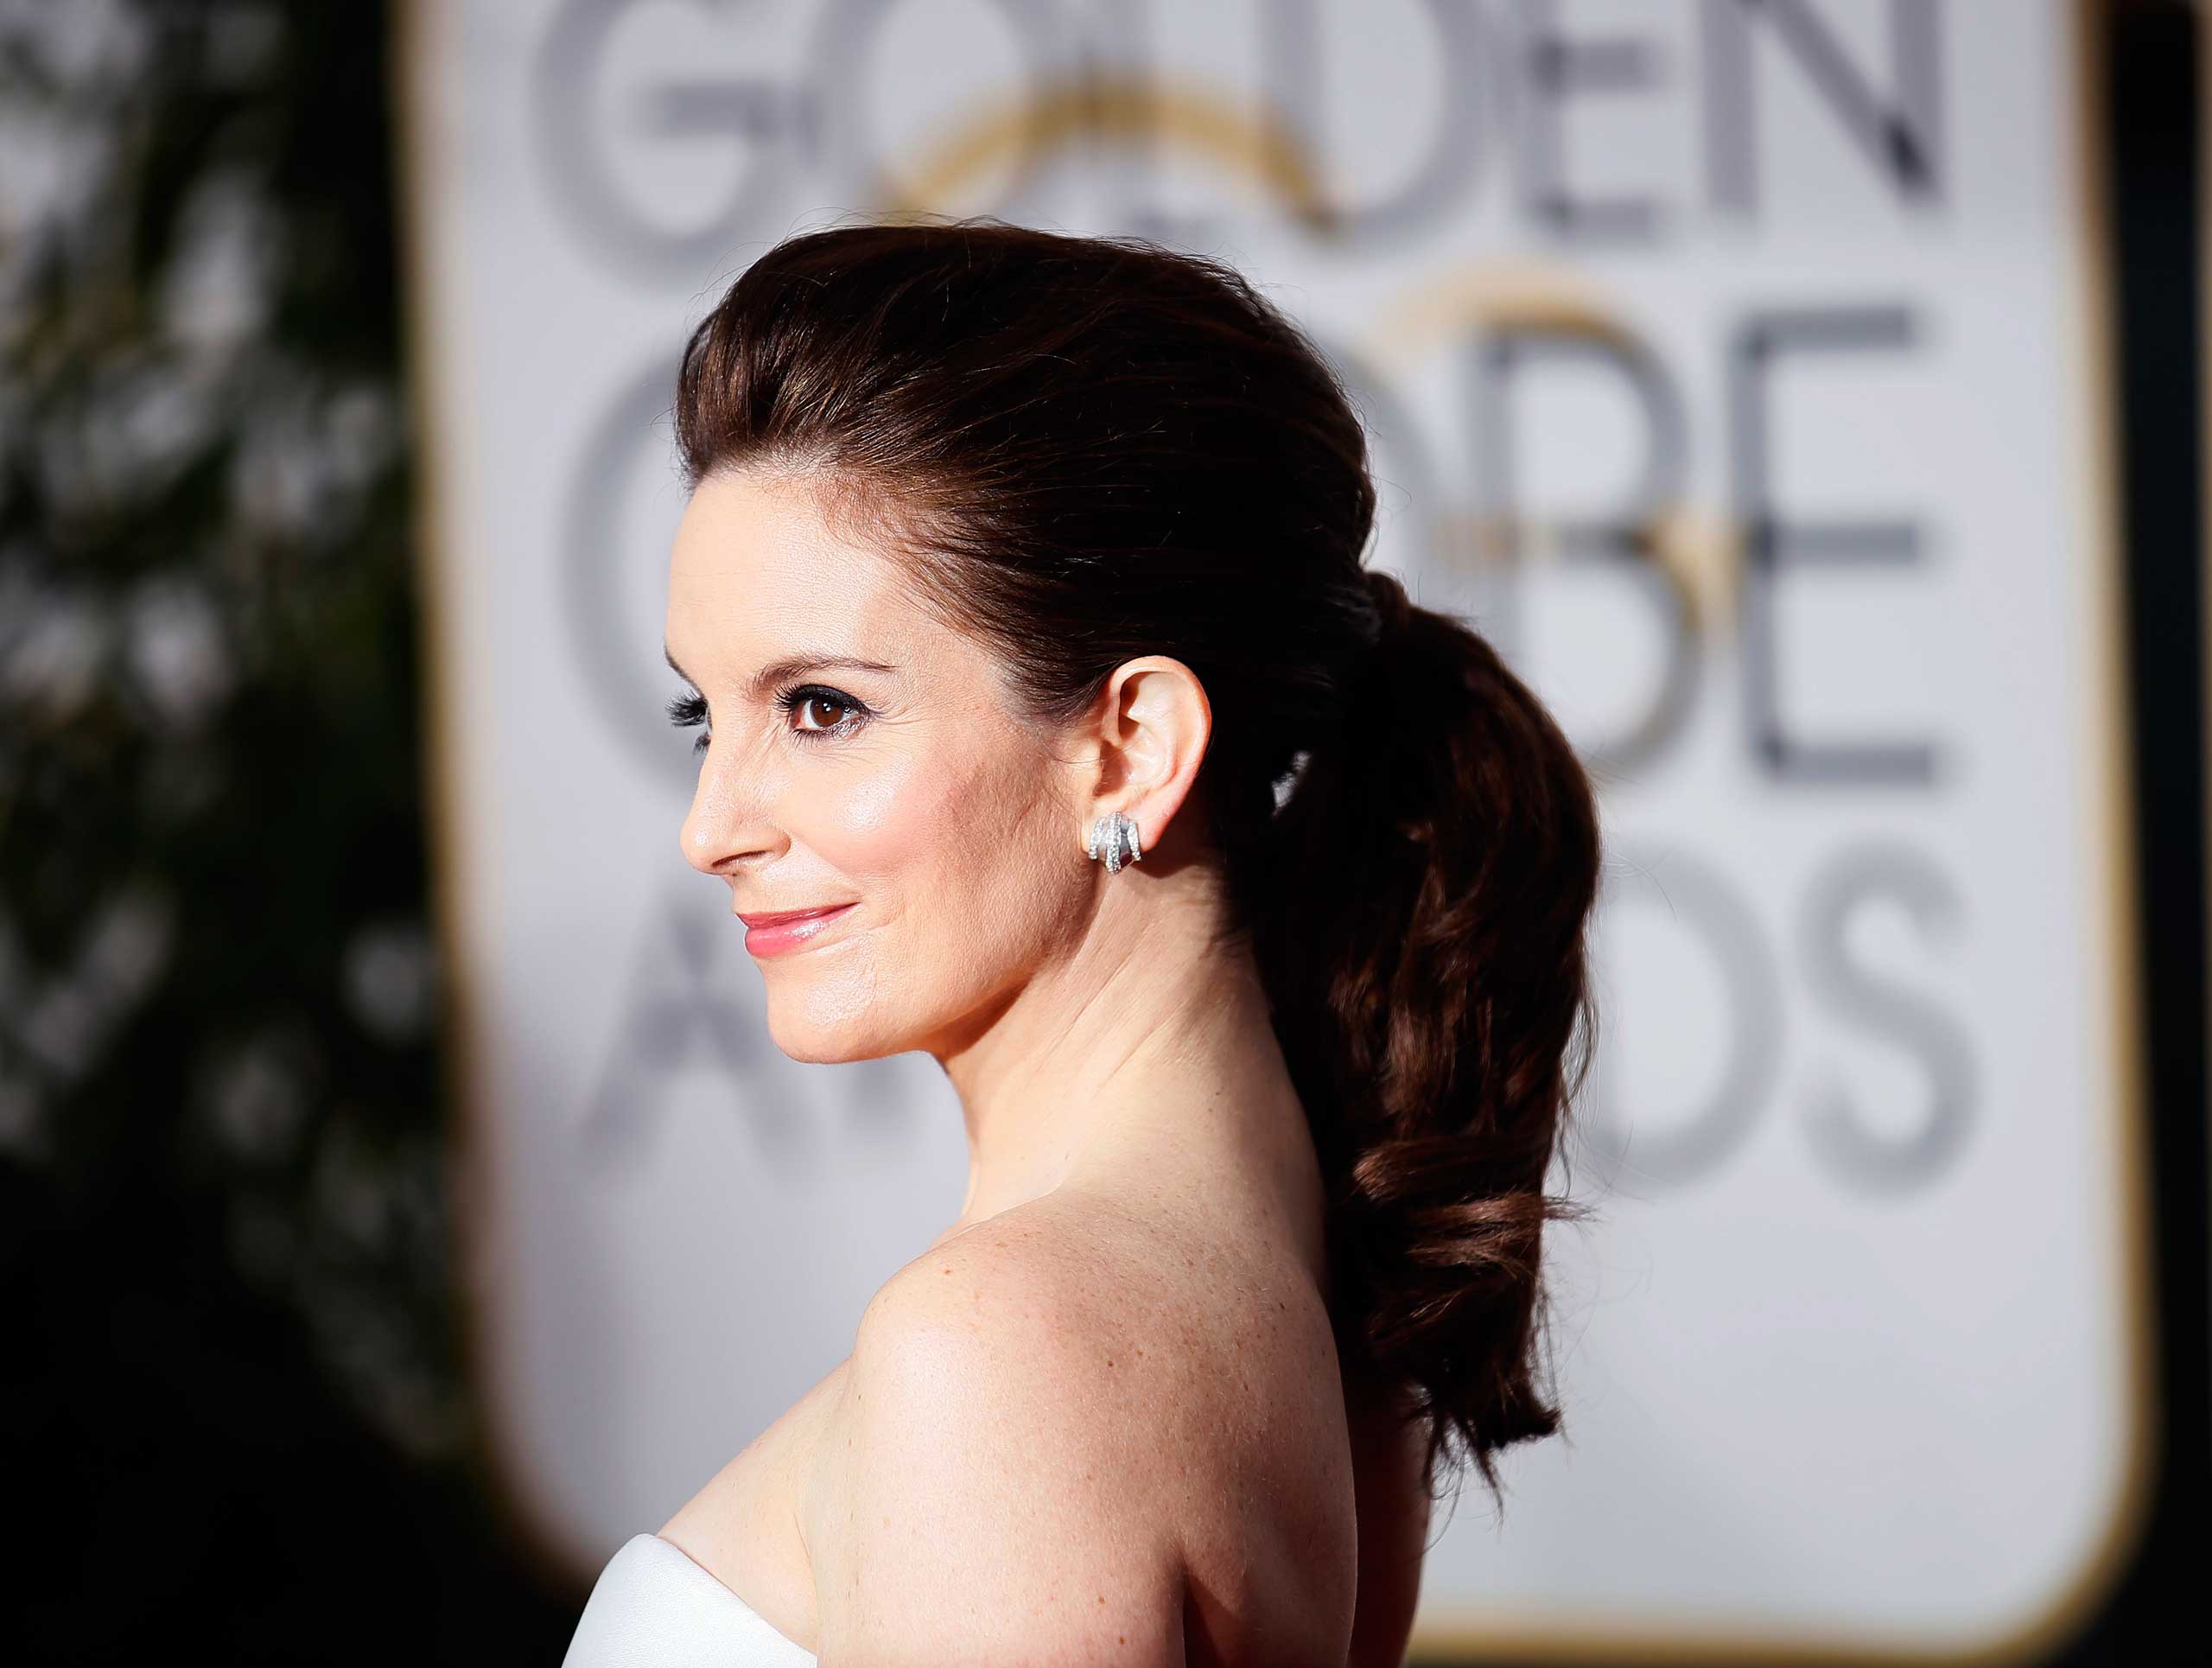 Tina Fey arrives at the 72nd Golden Globe Awards in Beverly Hills, California, Jan. 11, 2015.